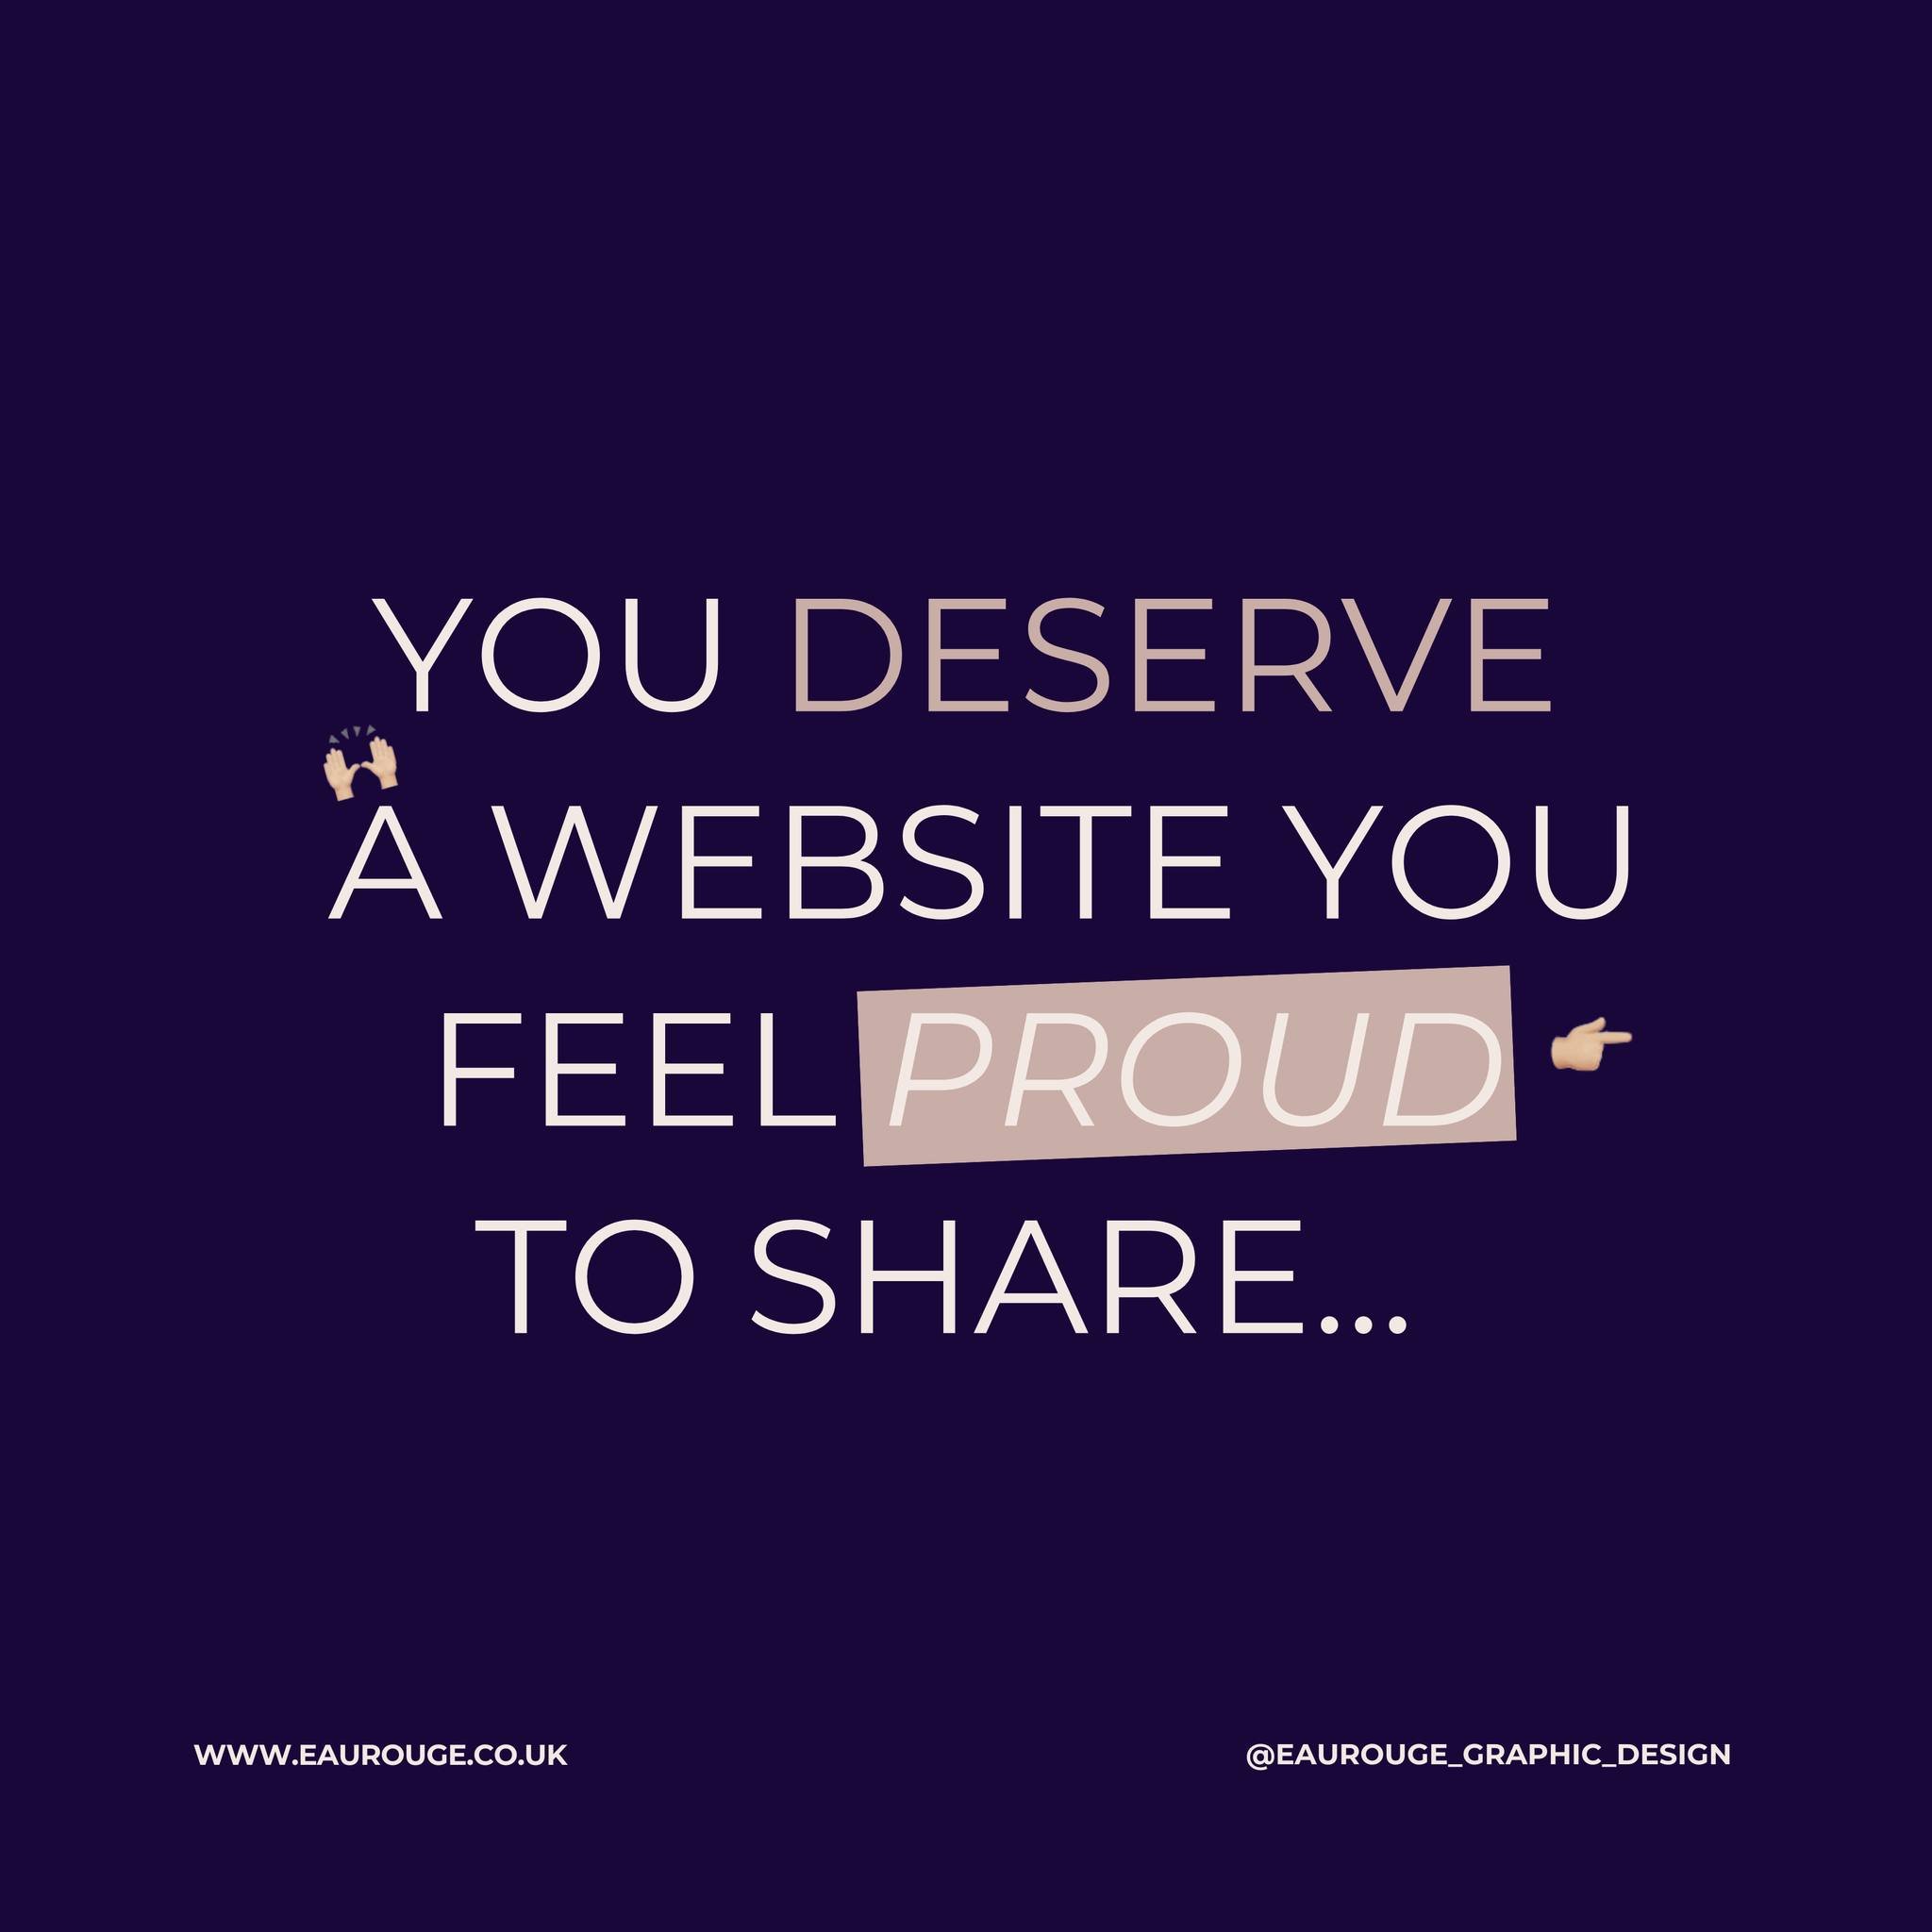 So, you're embarrassed to send anyone to your website? 🫣

You cringe every time someone asks for your web address... eek! 😬

You even avoid visiting your site because you dislike it that much.

I totally get it. No, really, I do! I've worked with c